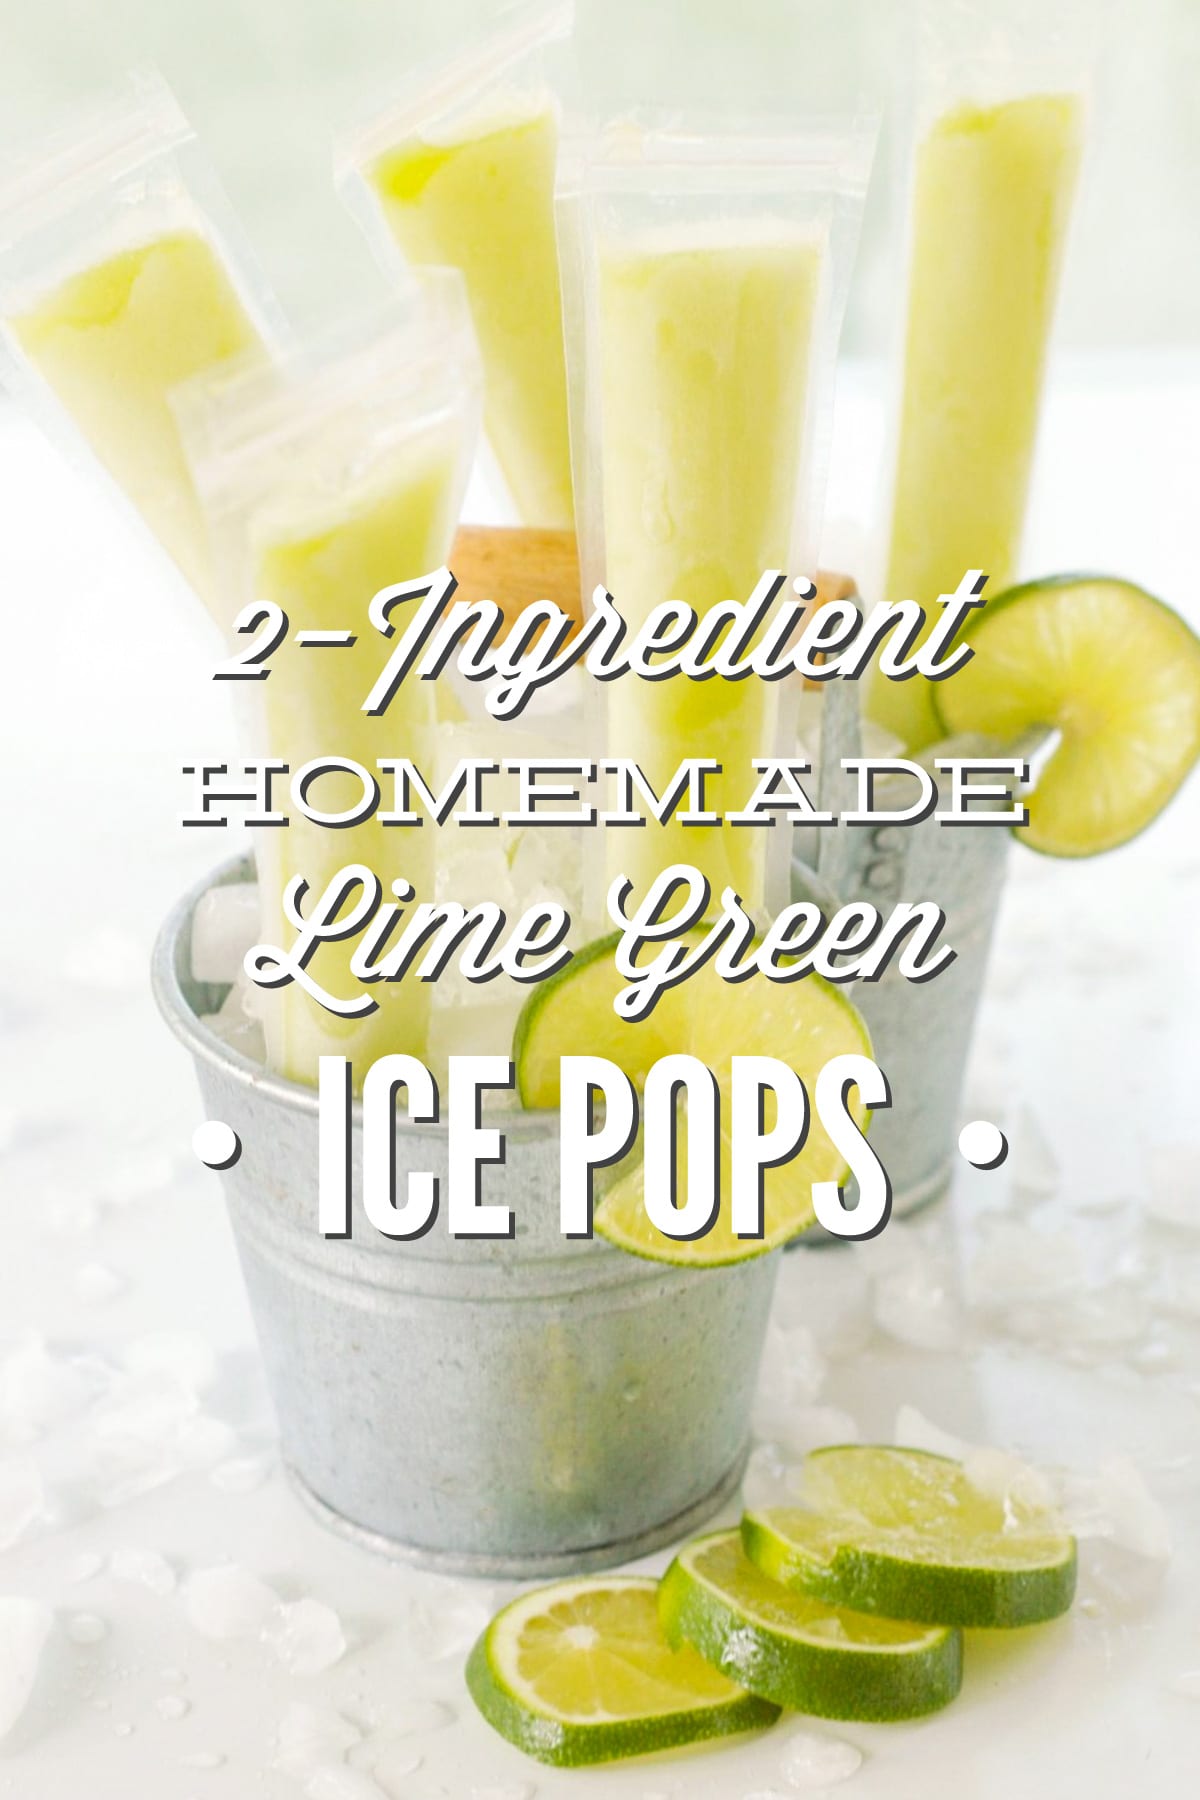 2-Ingredient Homemade Lime Green Ice Pops (Real Food Style)